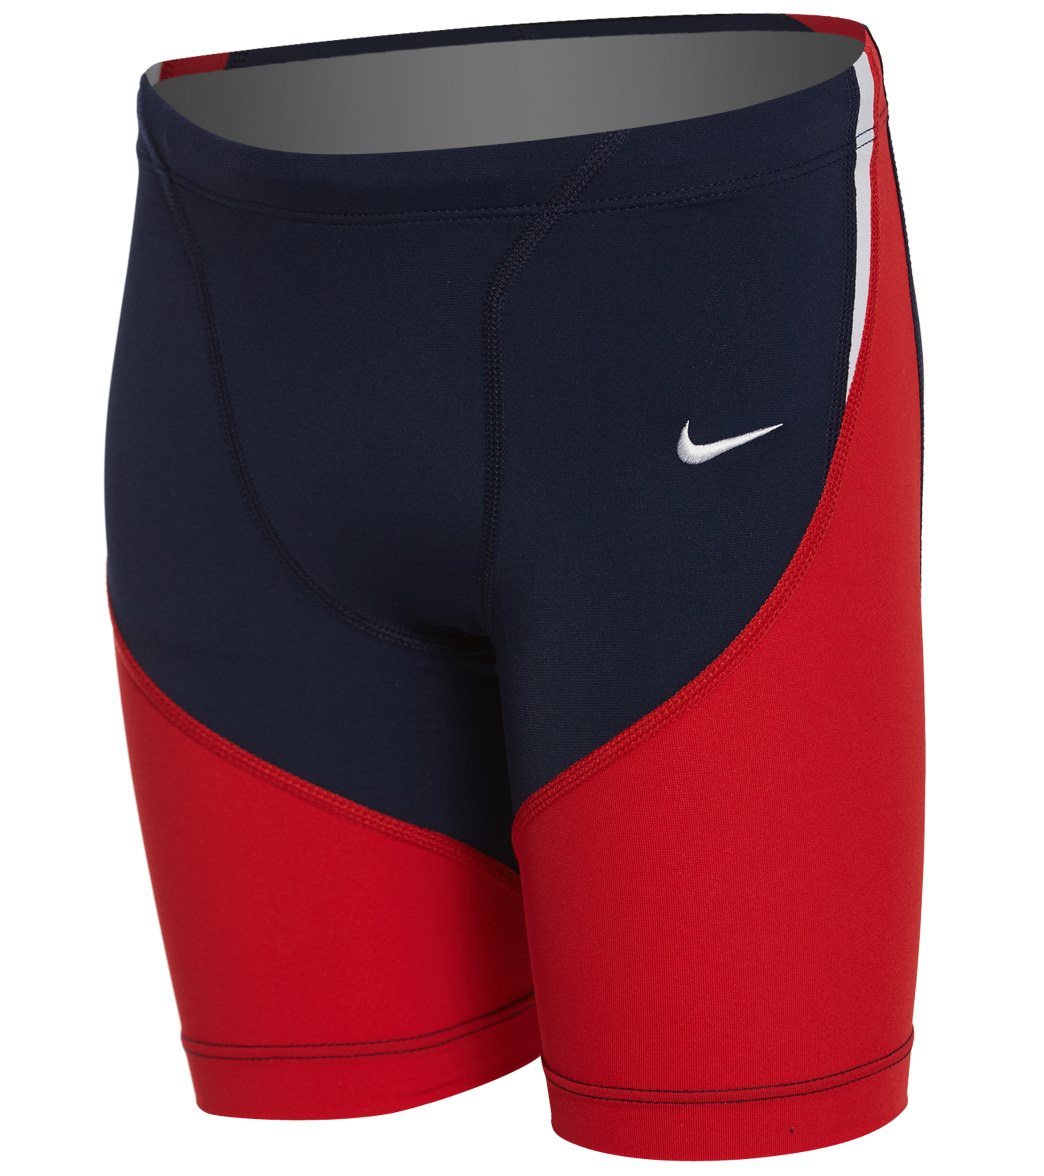 Nike Boy's Color Surge Jammer Swimsuit - Red/Navy 22 Polyester/Spandex - Swimoutlet.com